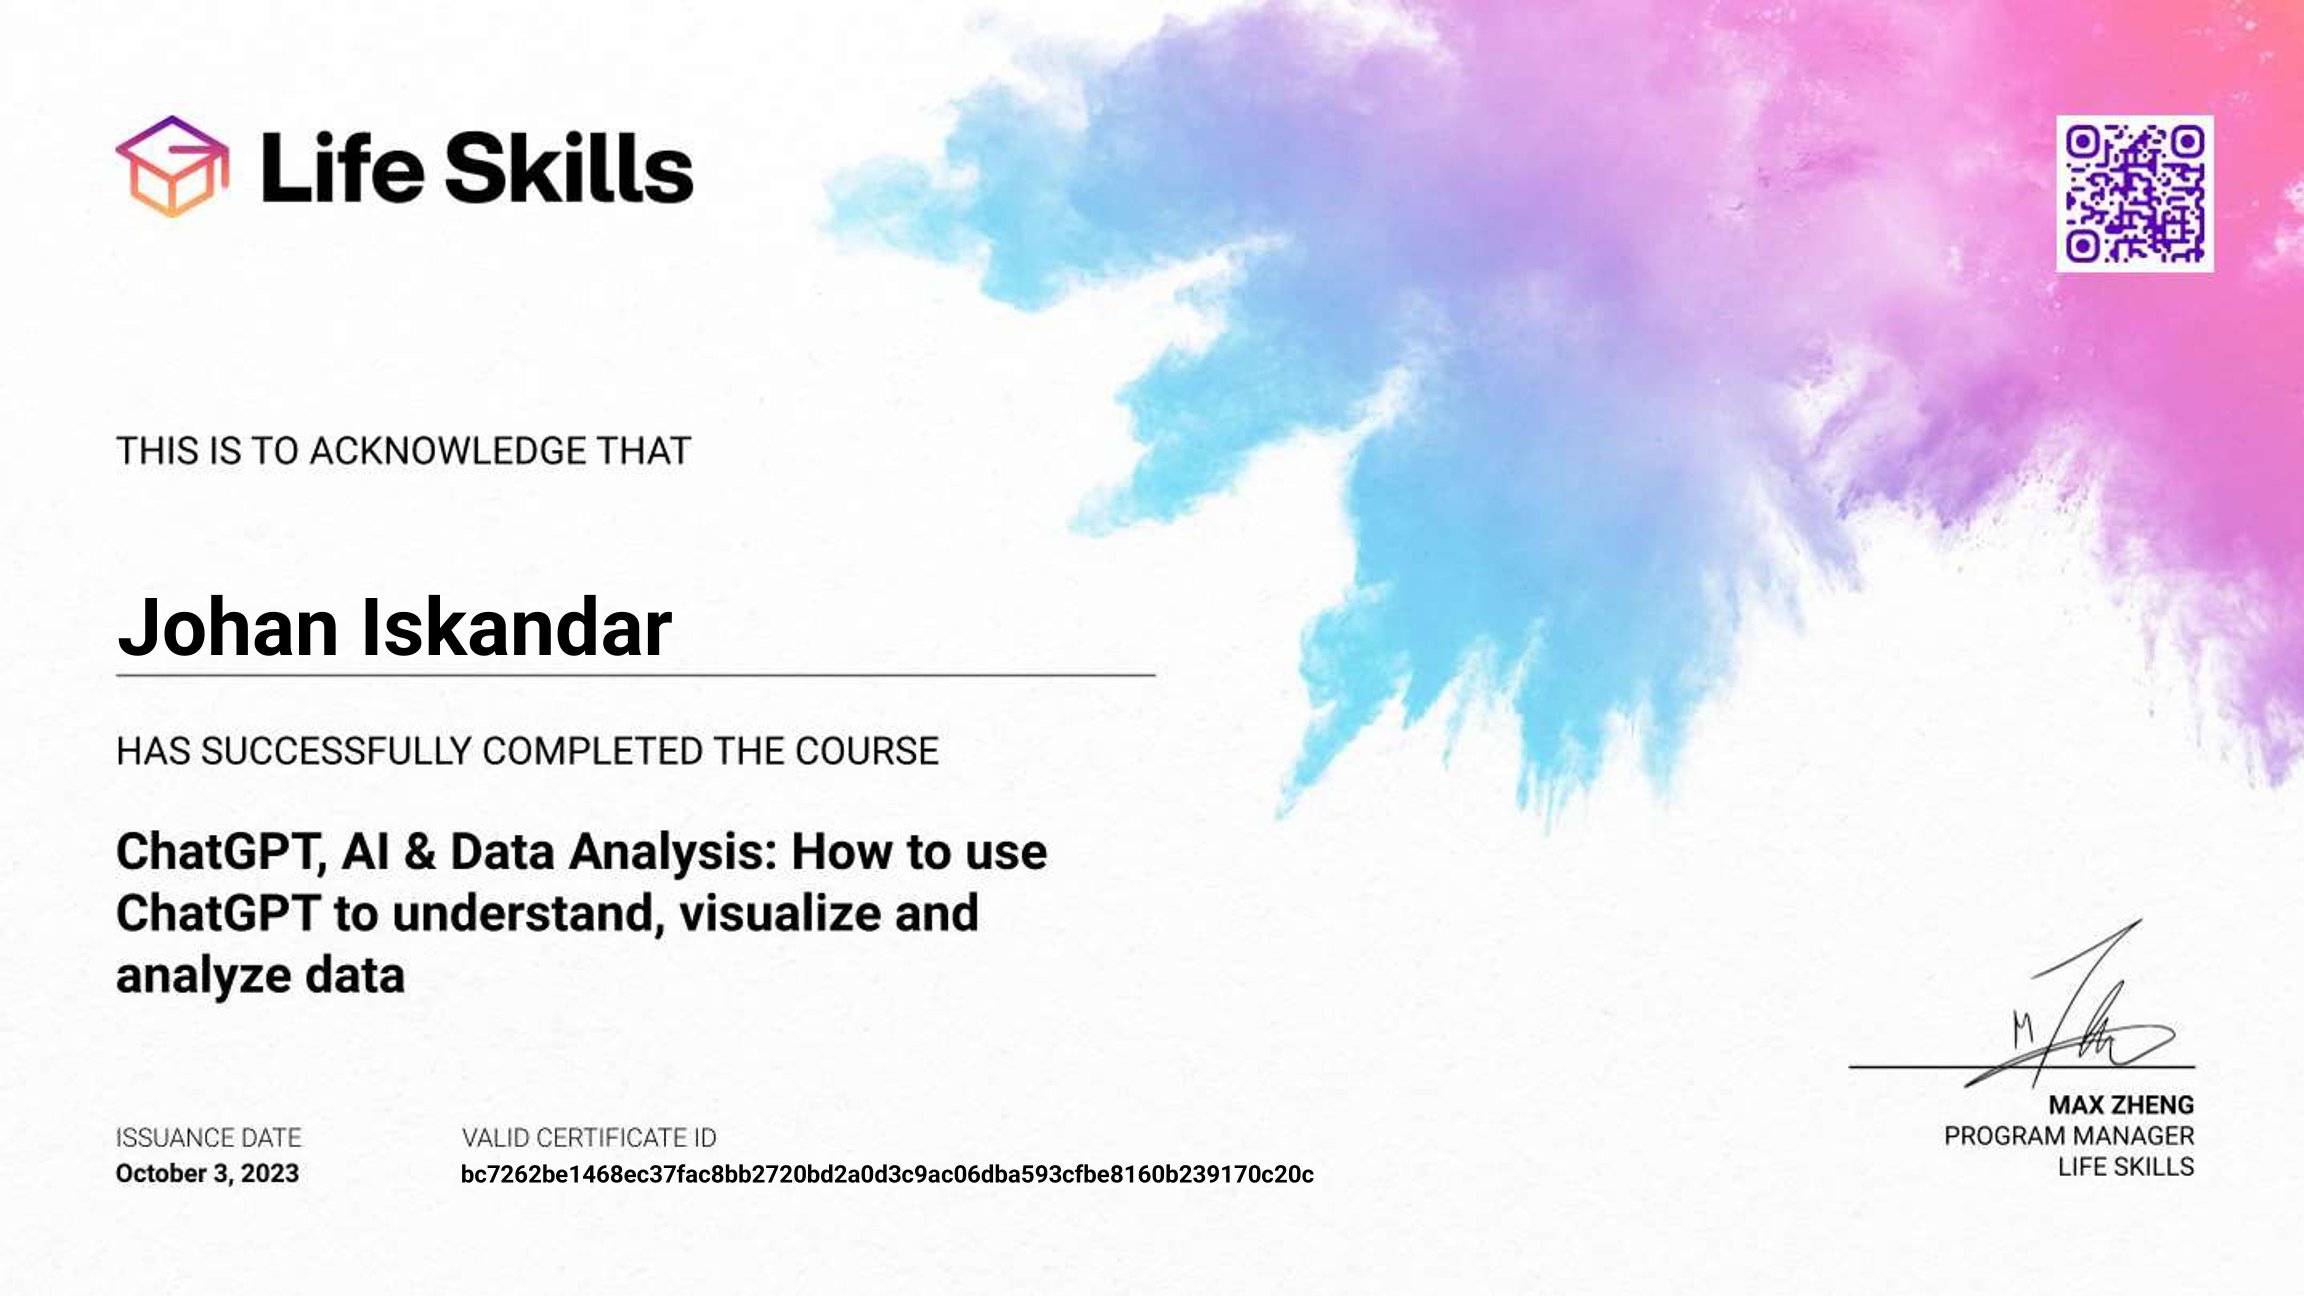 Life Skills - ChatGPT, AI & Data Analysis How to use ChatGPT to understand, visualize and analyze data - Johan Iskandar - Certificate